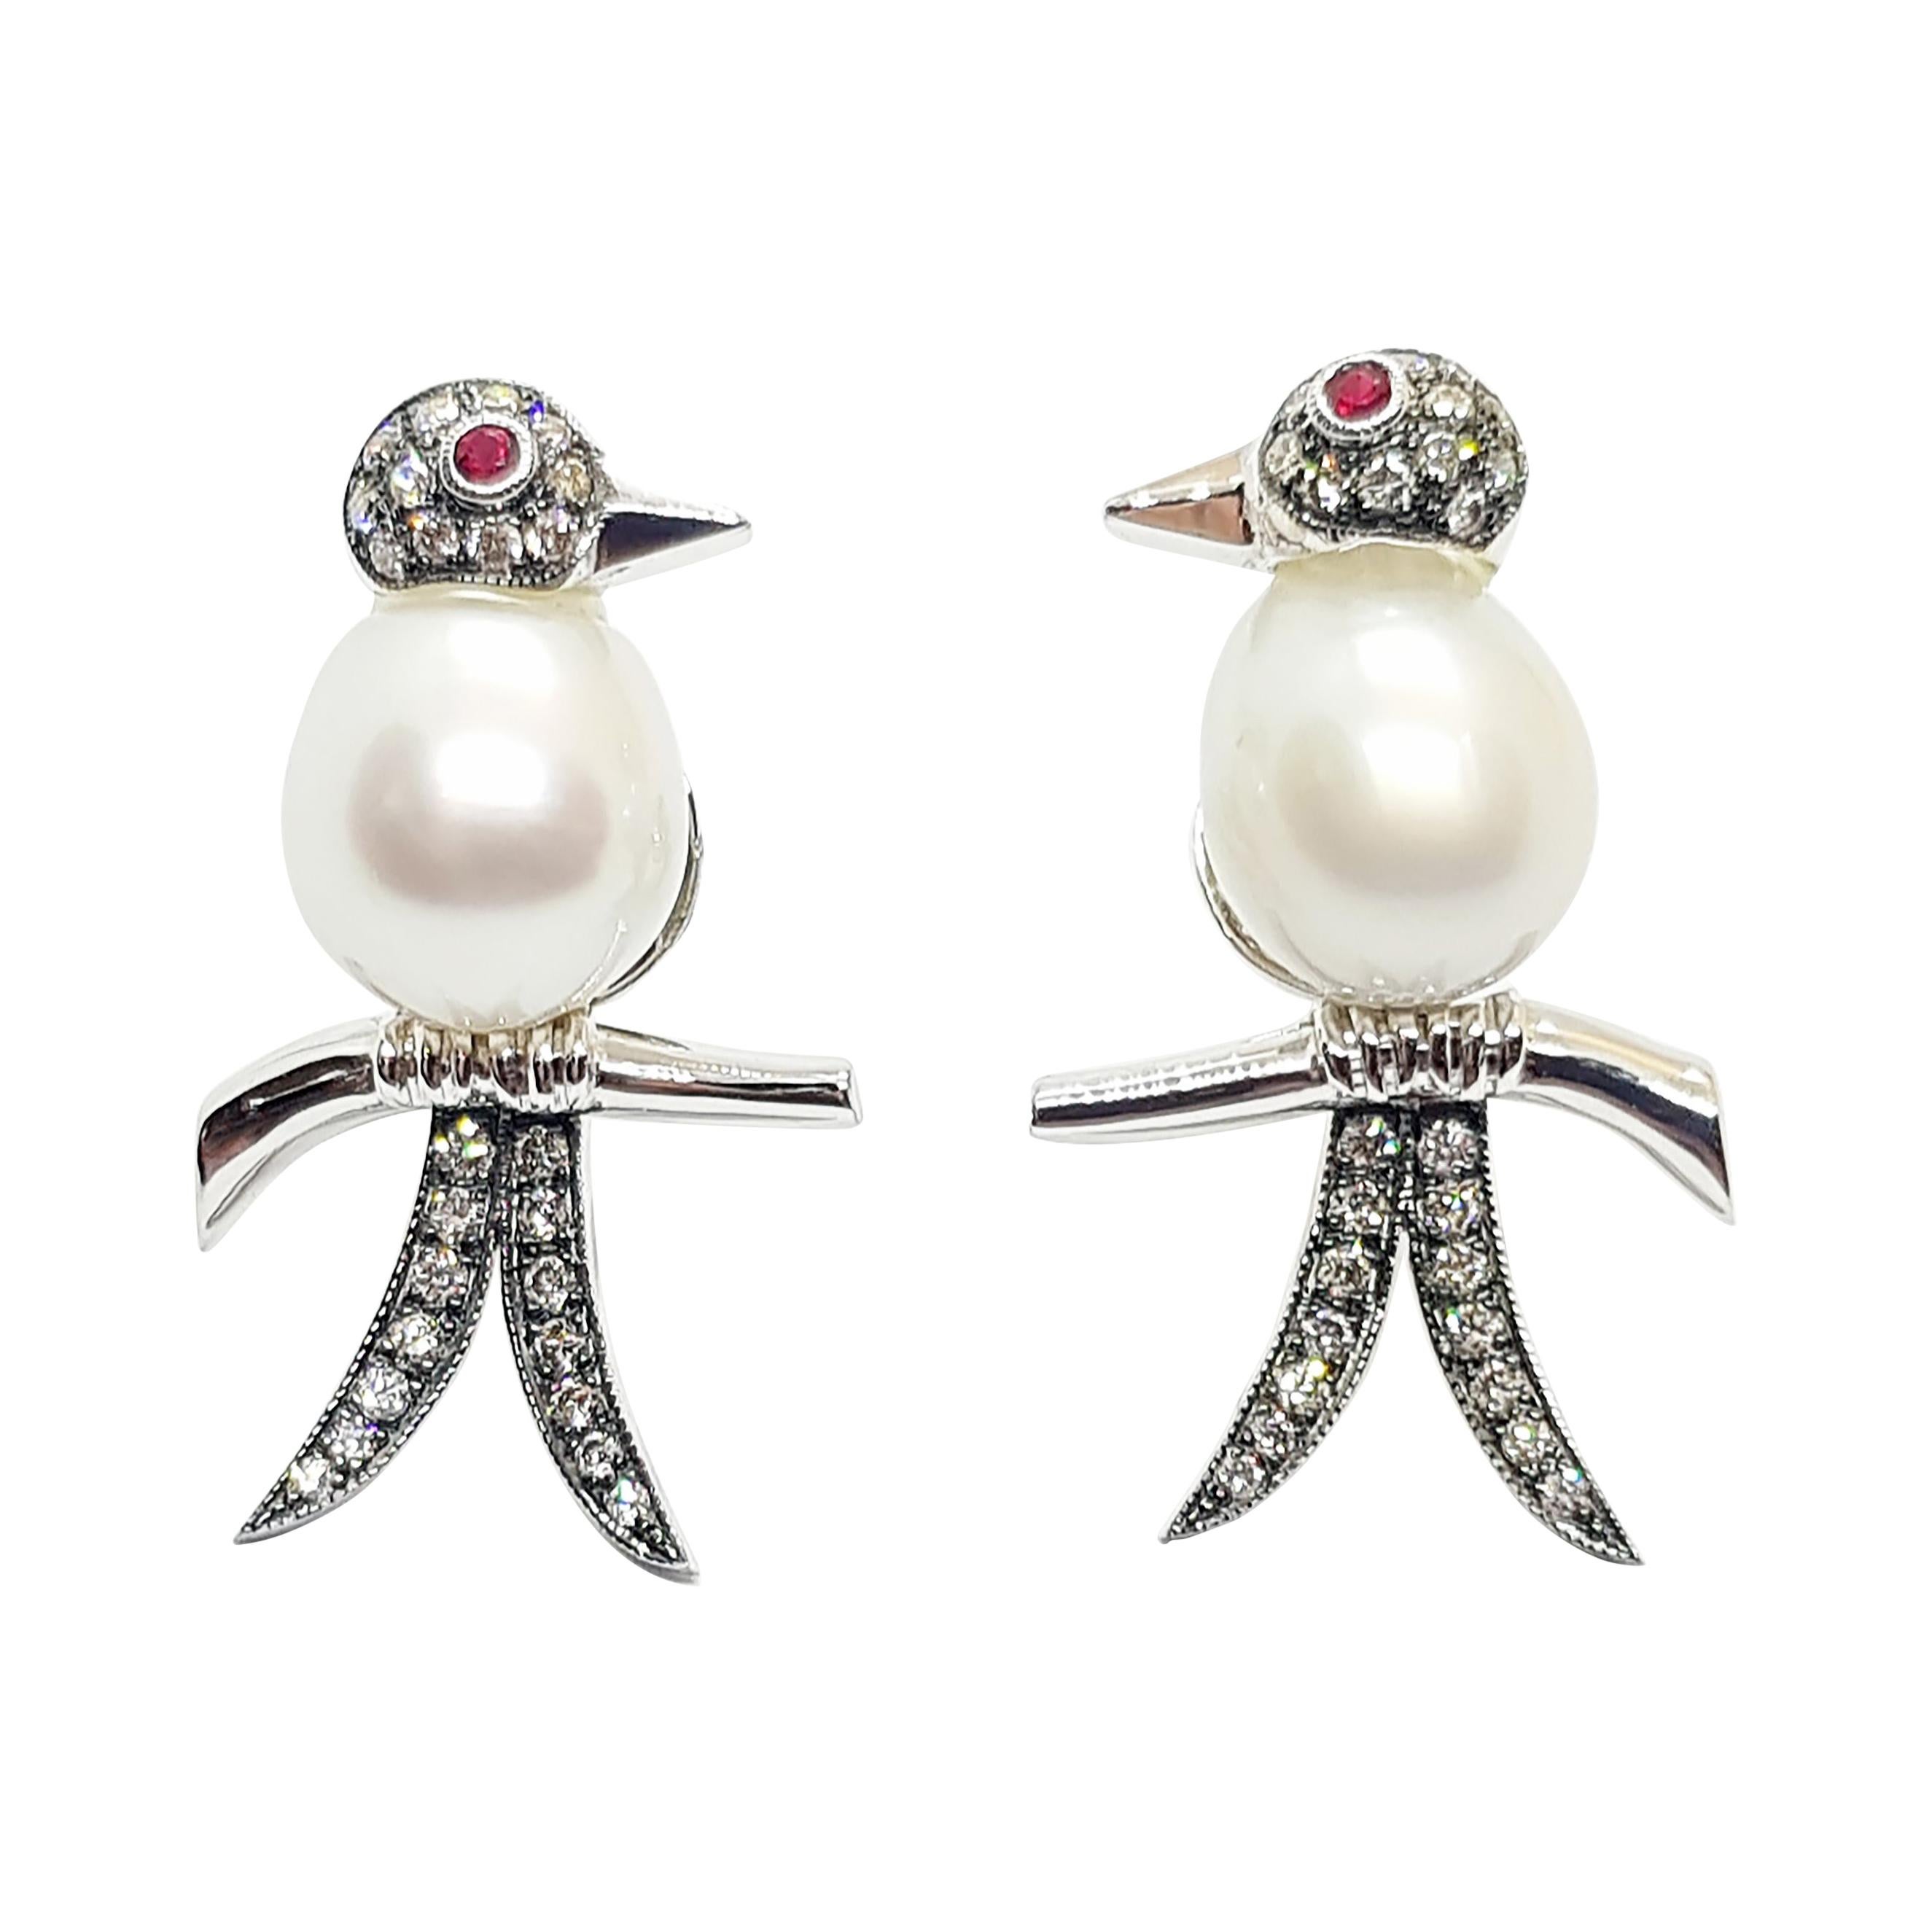 South Sea Pearl with Diamond and Ruby Bird Earrings Set in 18 Karat White Gold